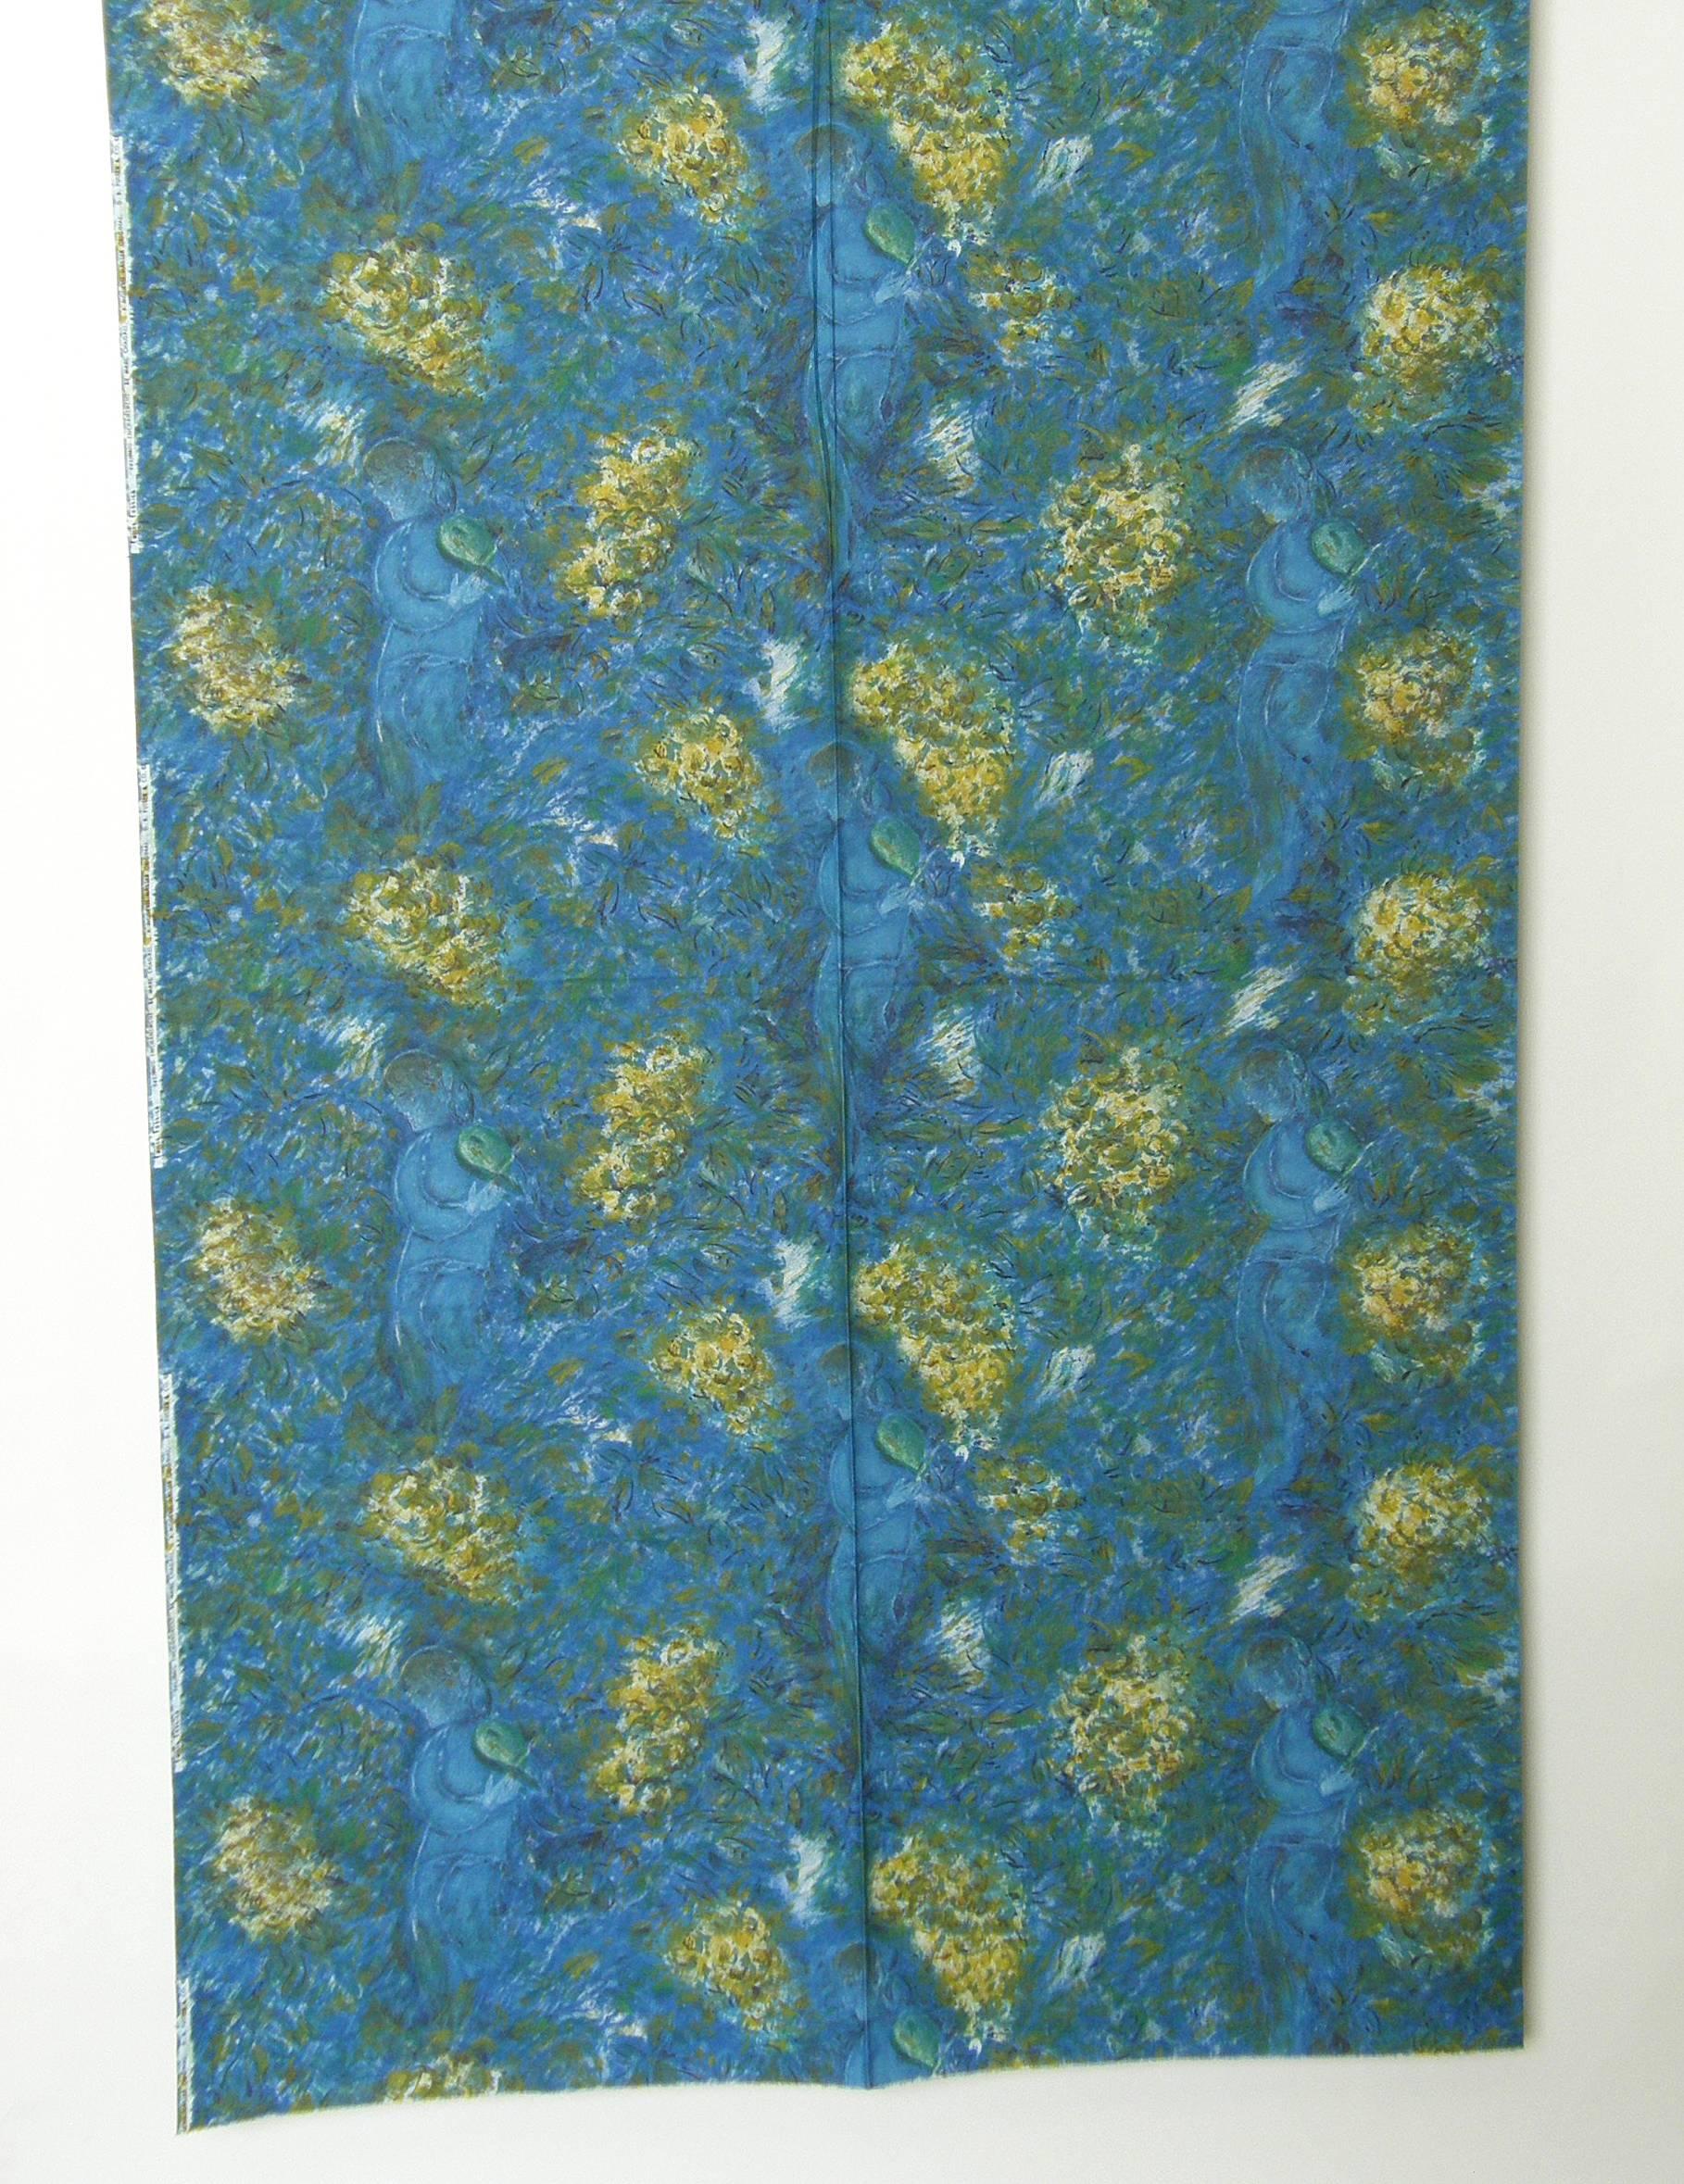 This lovely fabric was designed by Marc Chagall for Fuller Fabrics. It is 